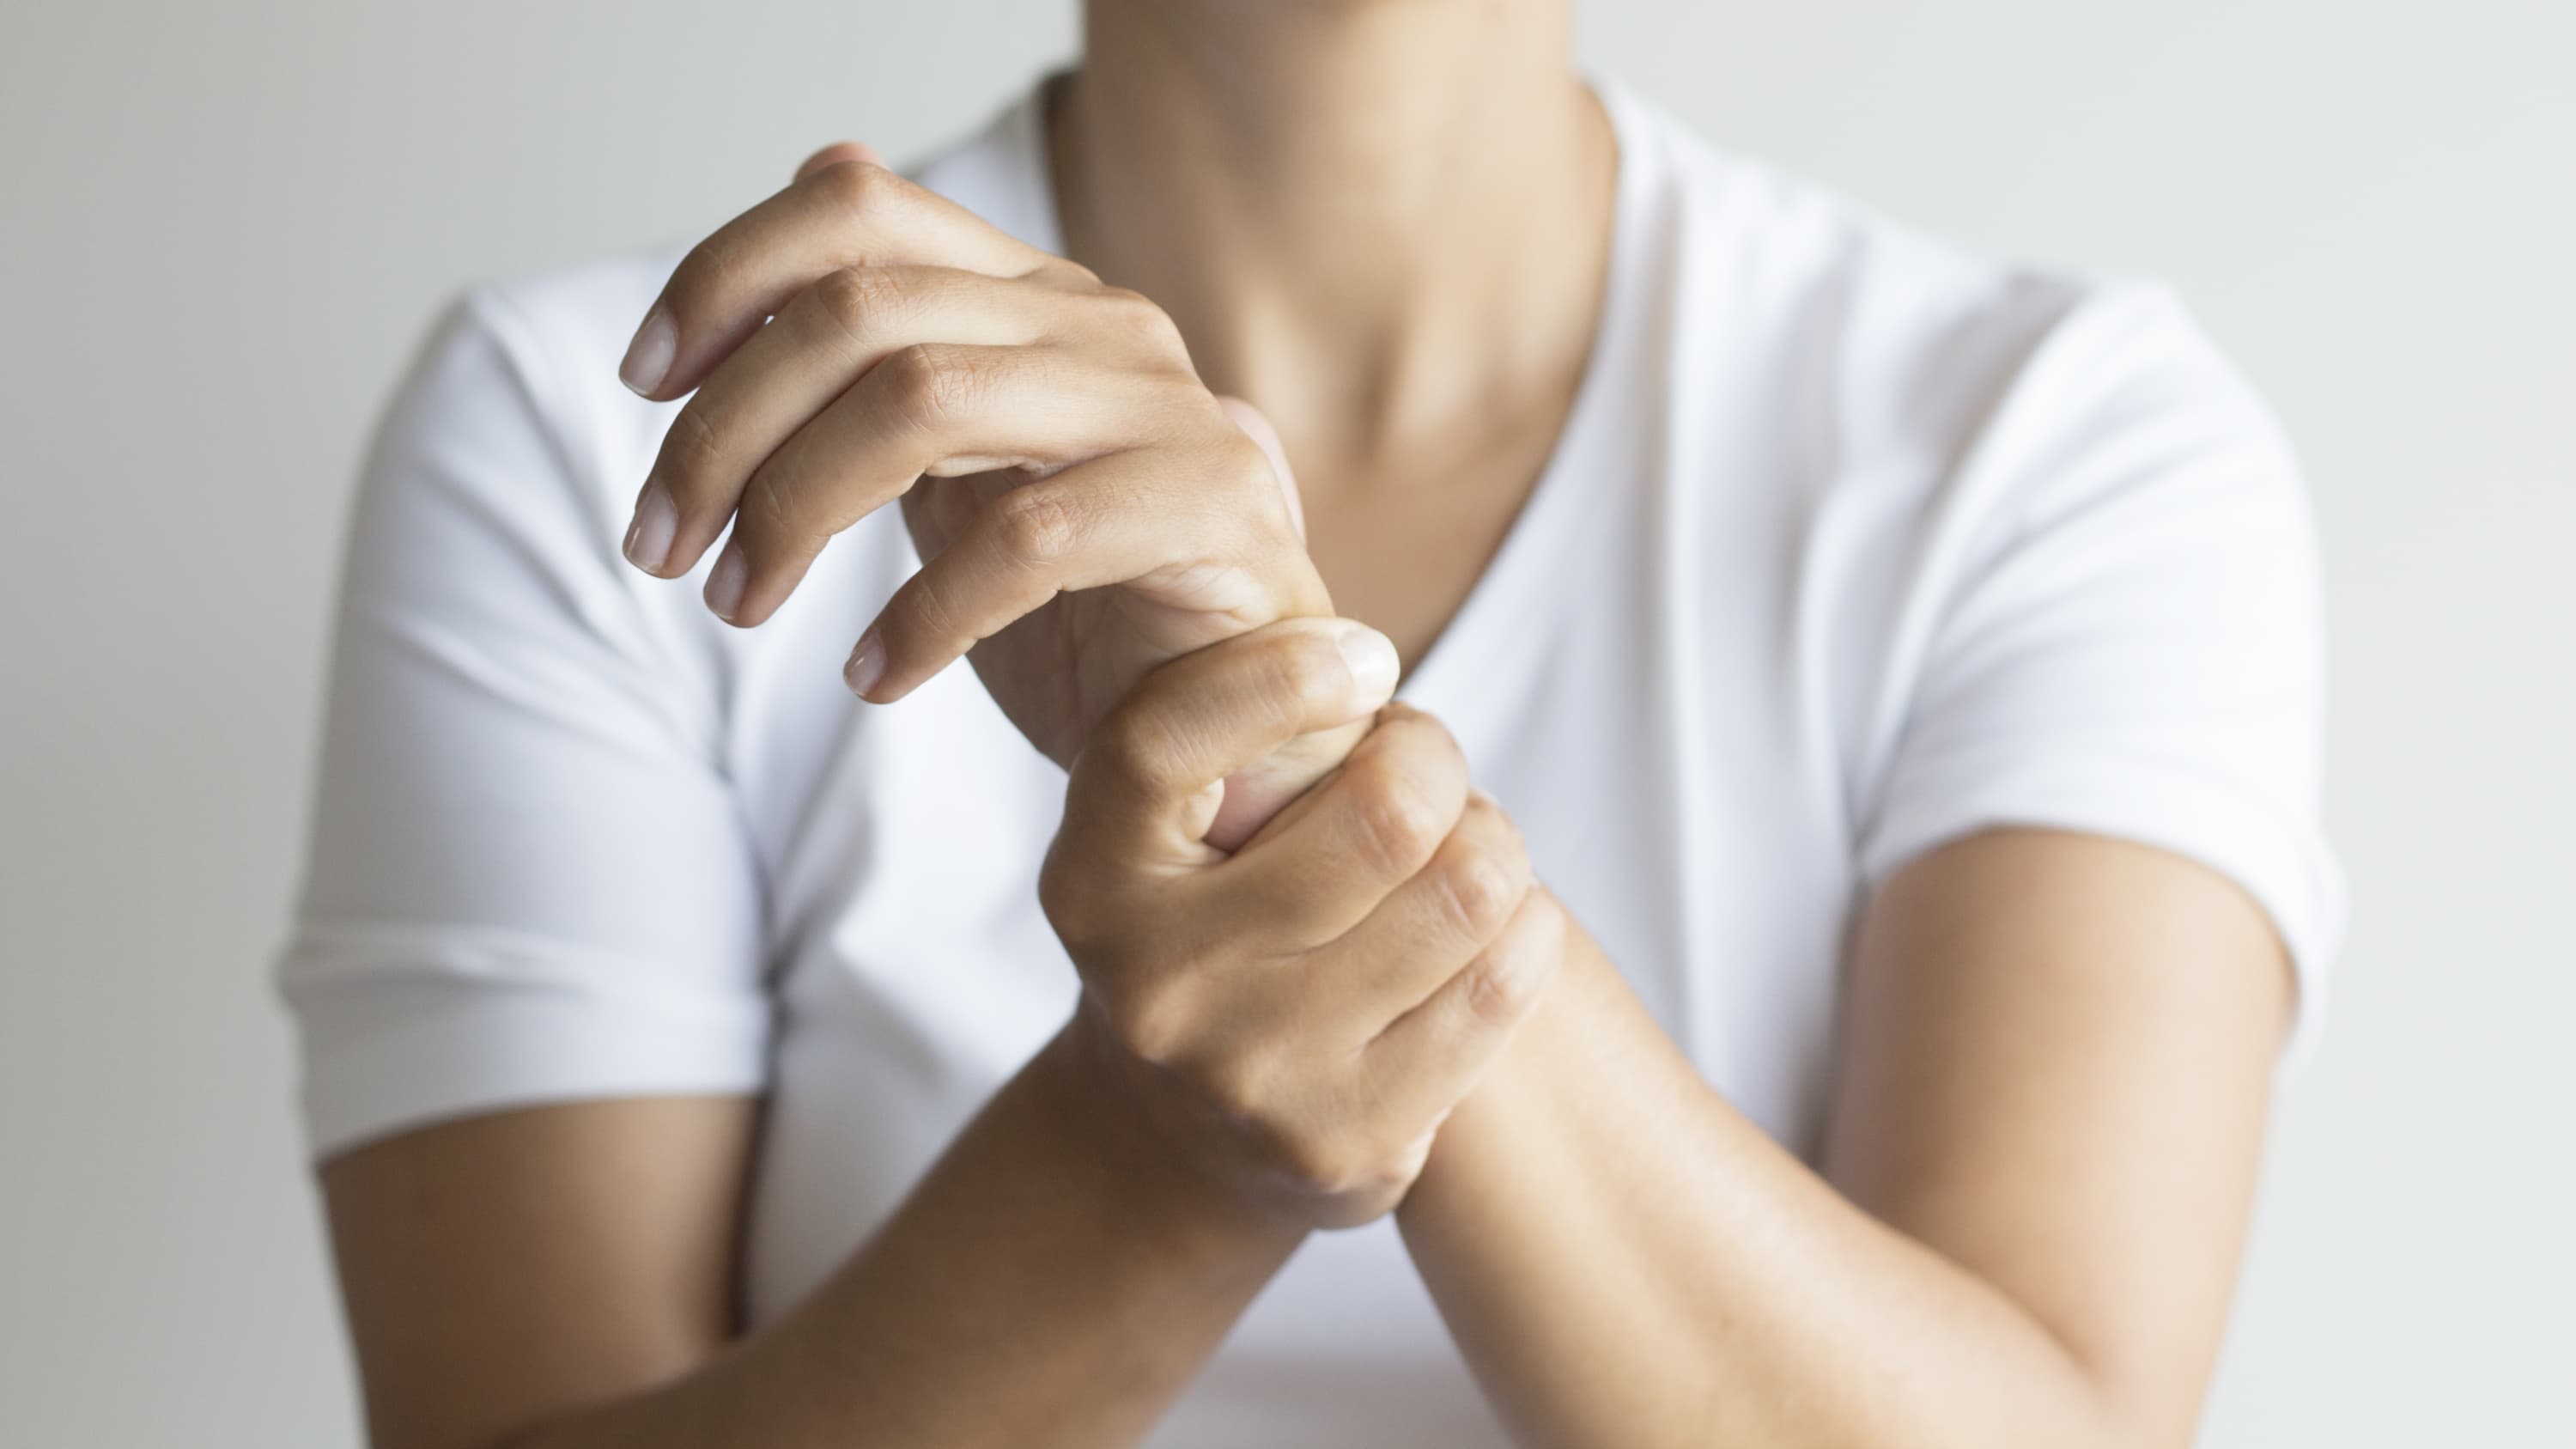 wrist pain, possbily from carpal tunnel syndrome